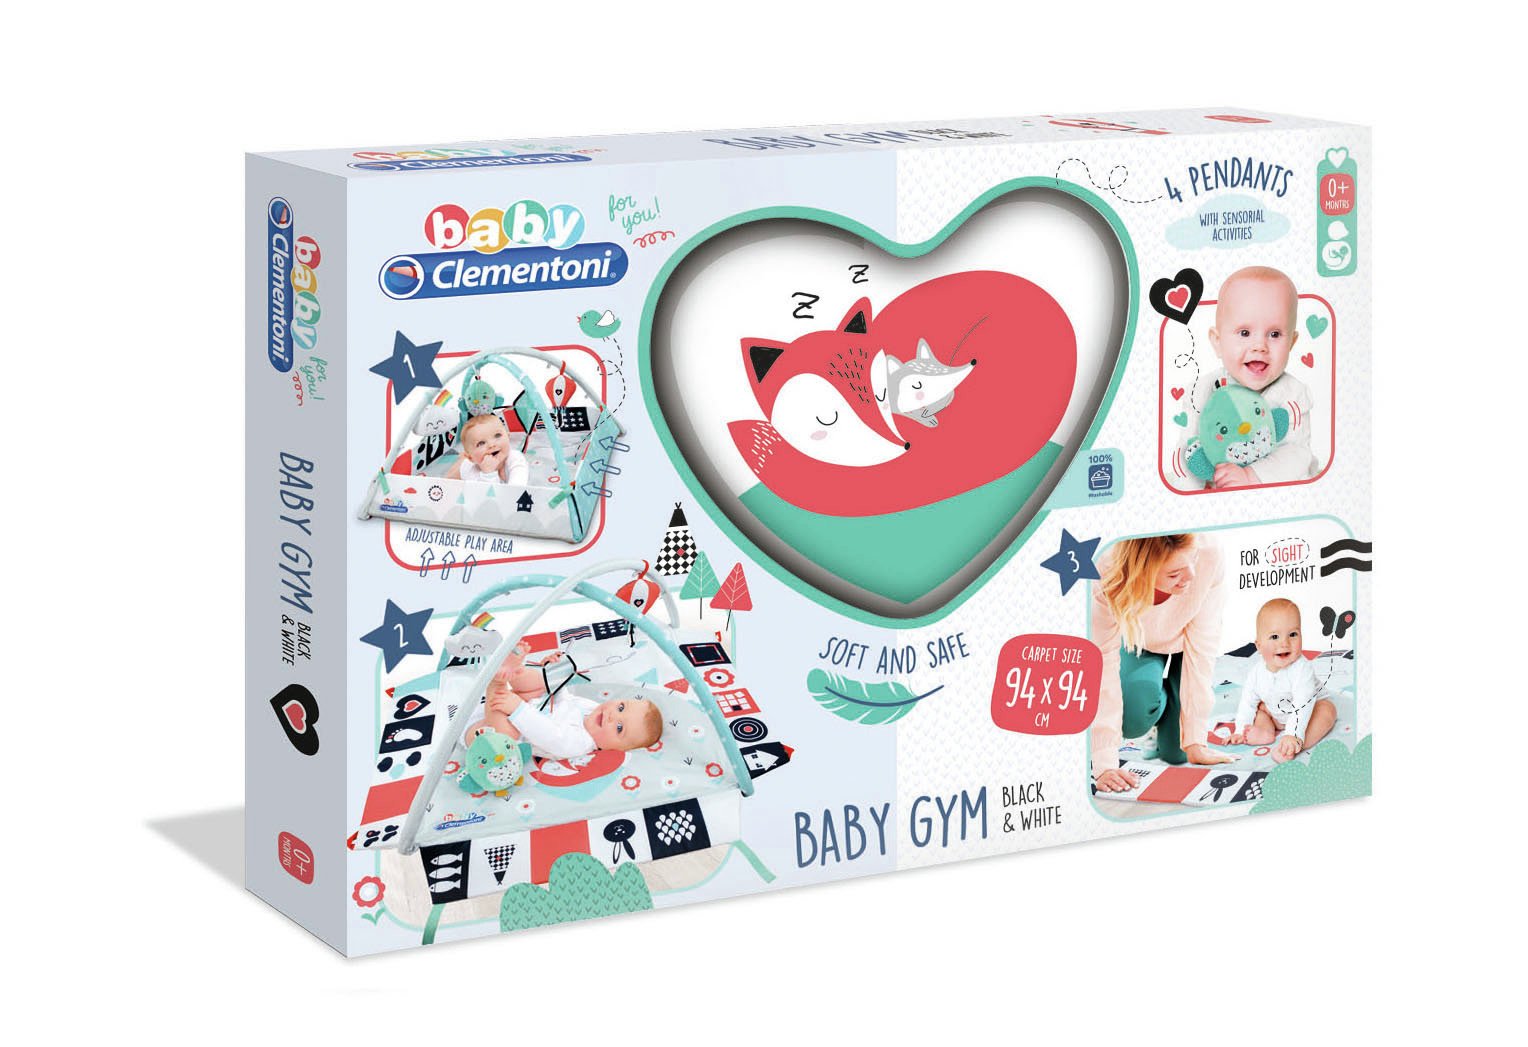 Baby Clementoni Black & White Baby Gym Review